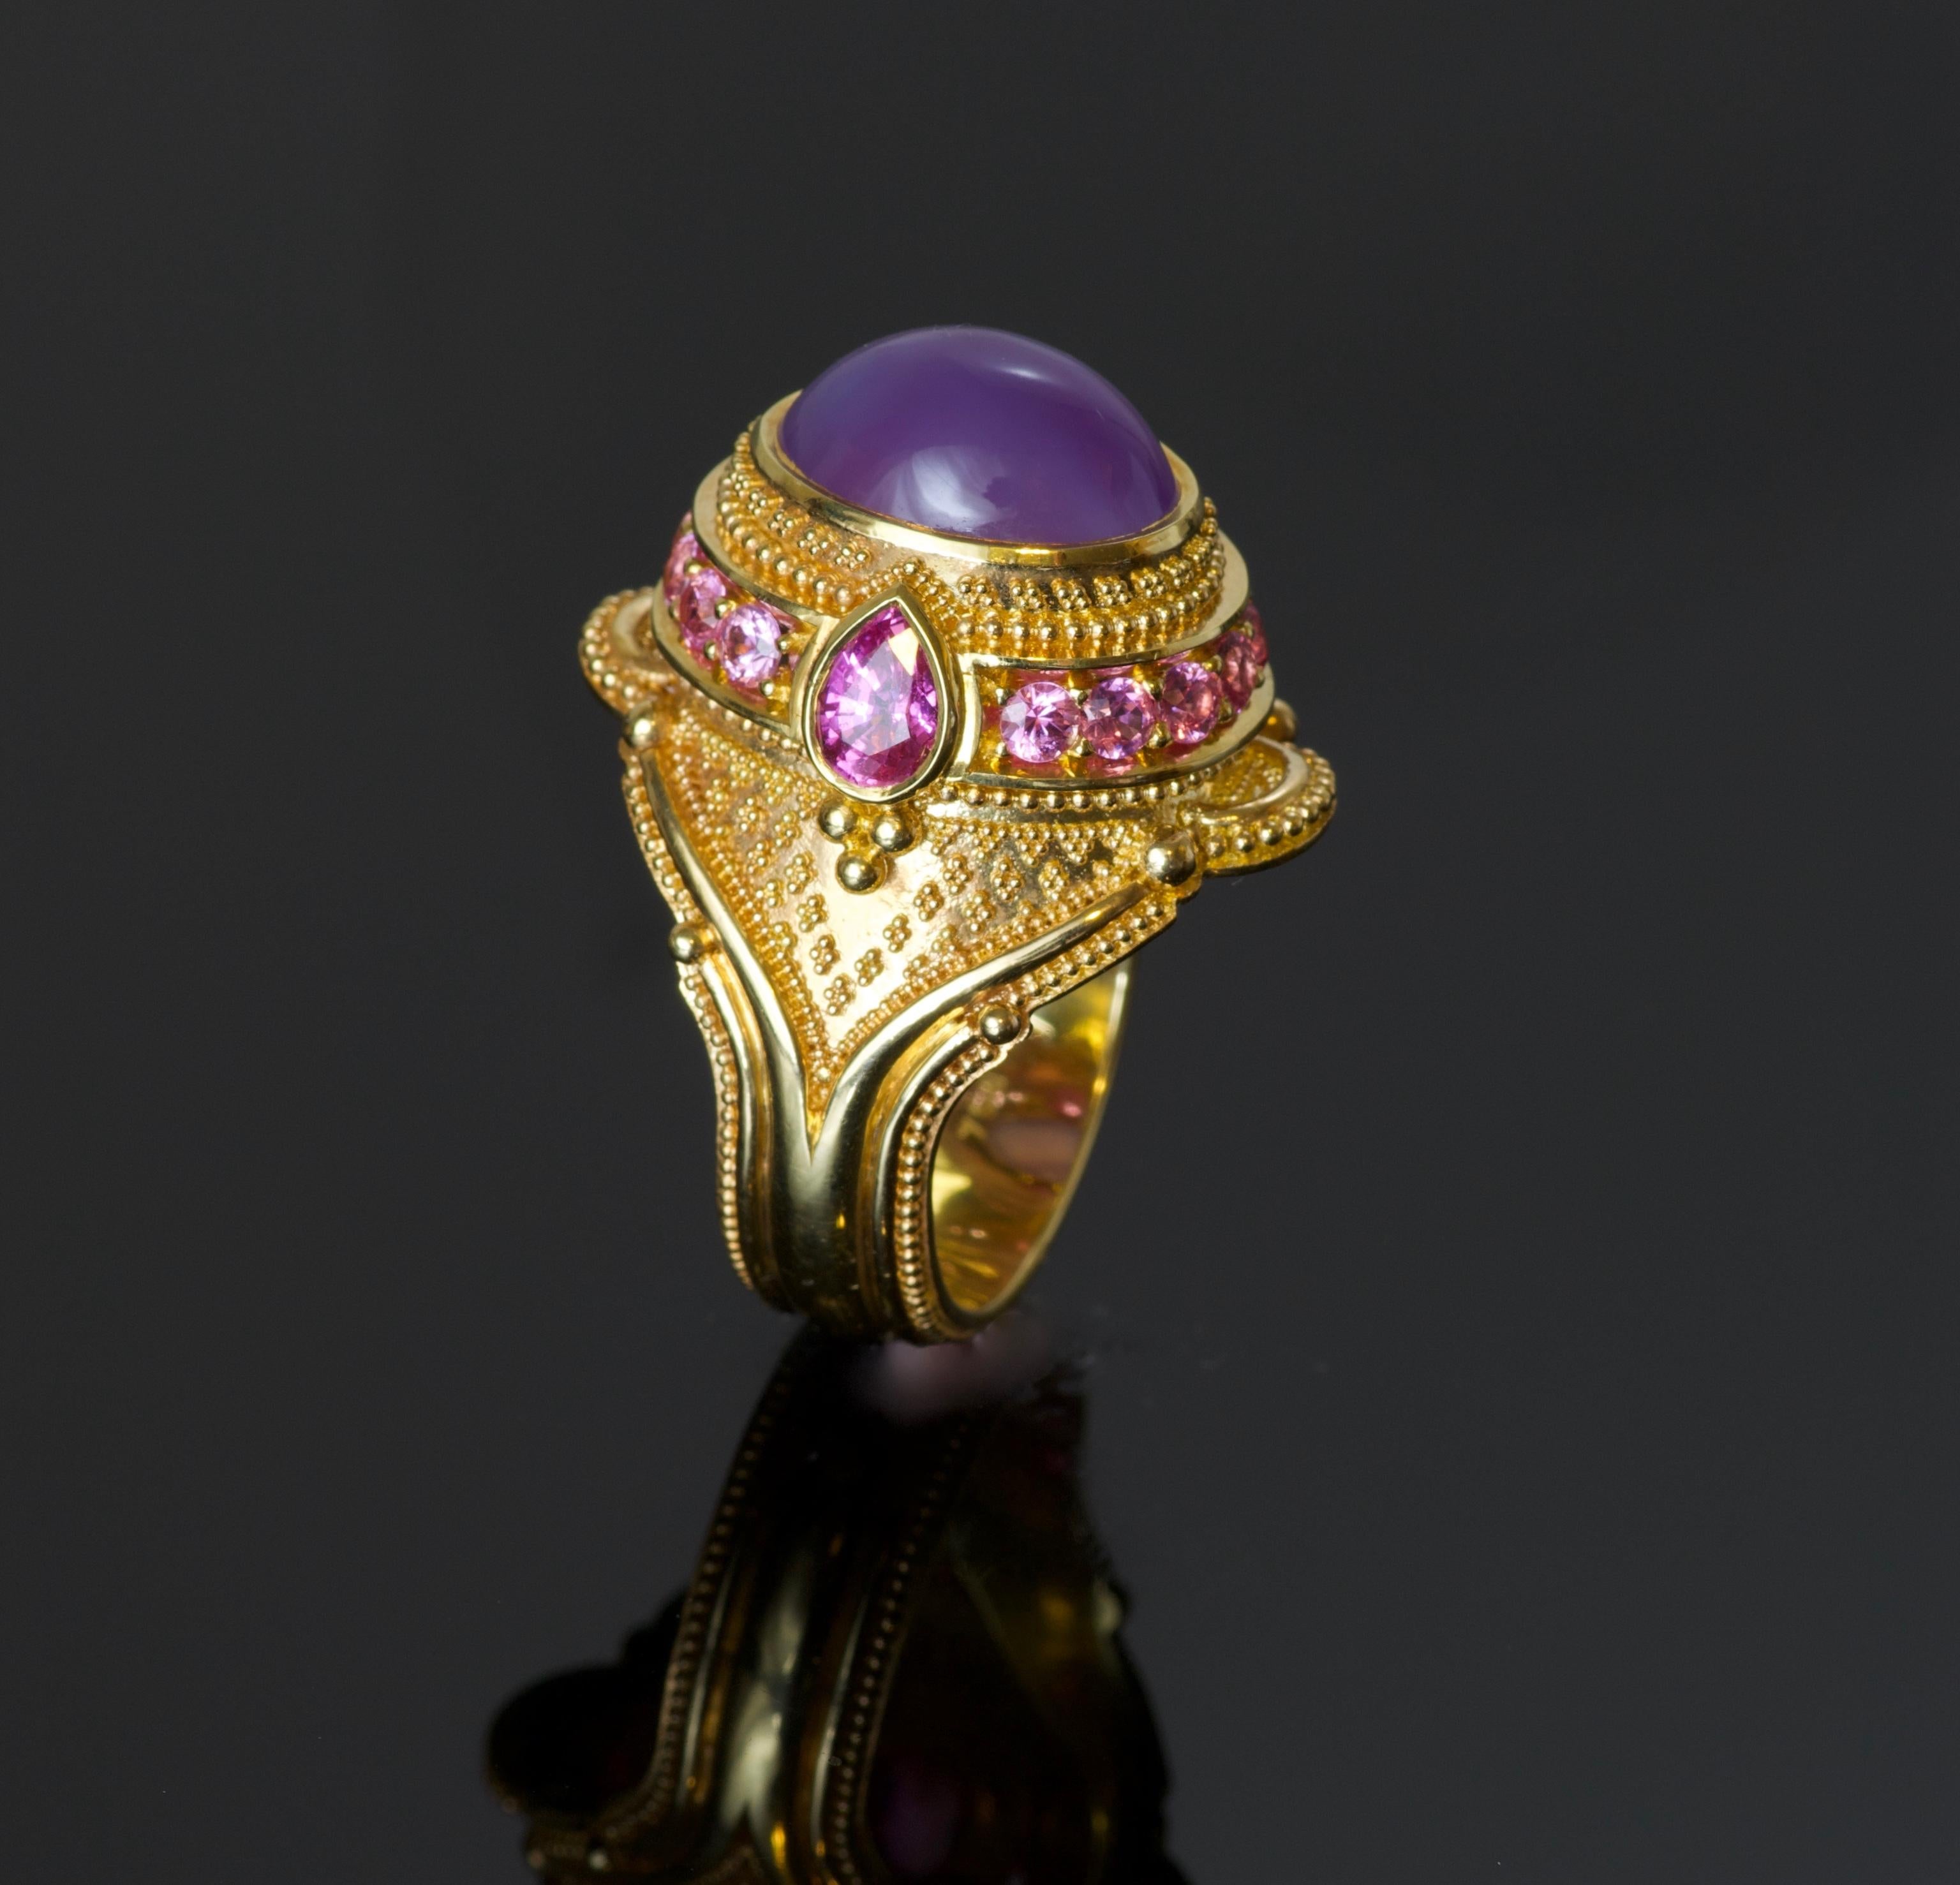 This one of a kind cocktail ring created by master goldsmith Kent Raible, features a Natural Oregon Holly Agate (5.39 carats) cabochon cut center gemstone, surrounded by Pink Sapphires (2.28 carat total weight), all set in 18  karat Gold (19.6